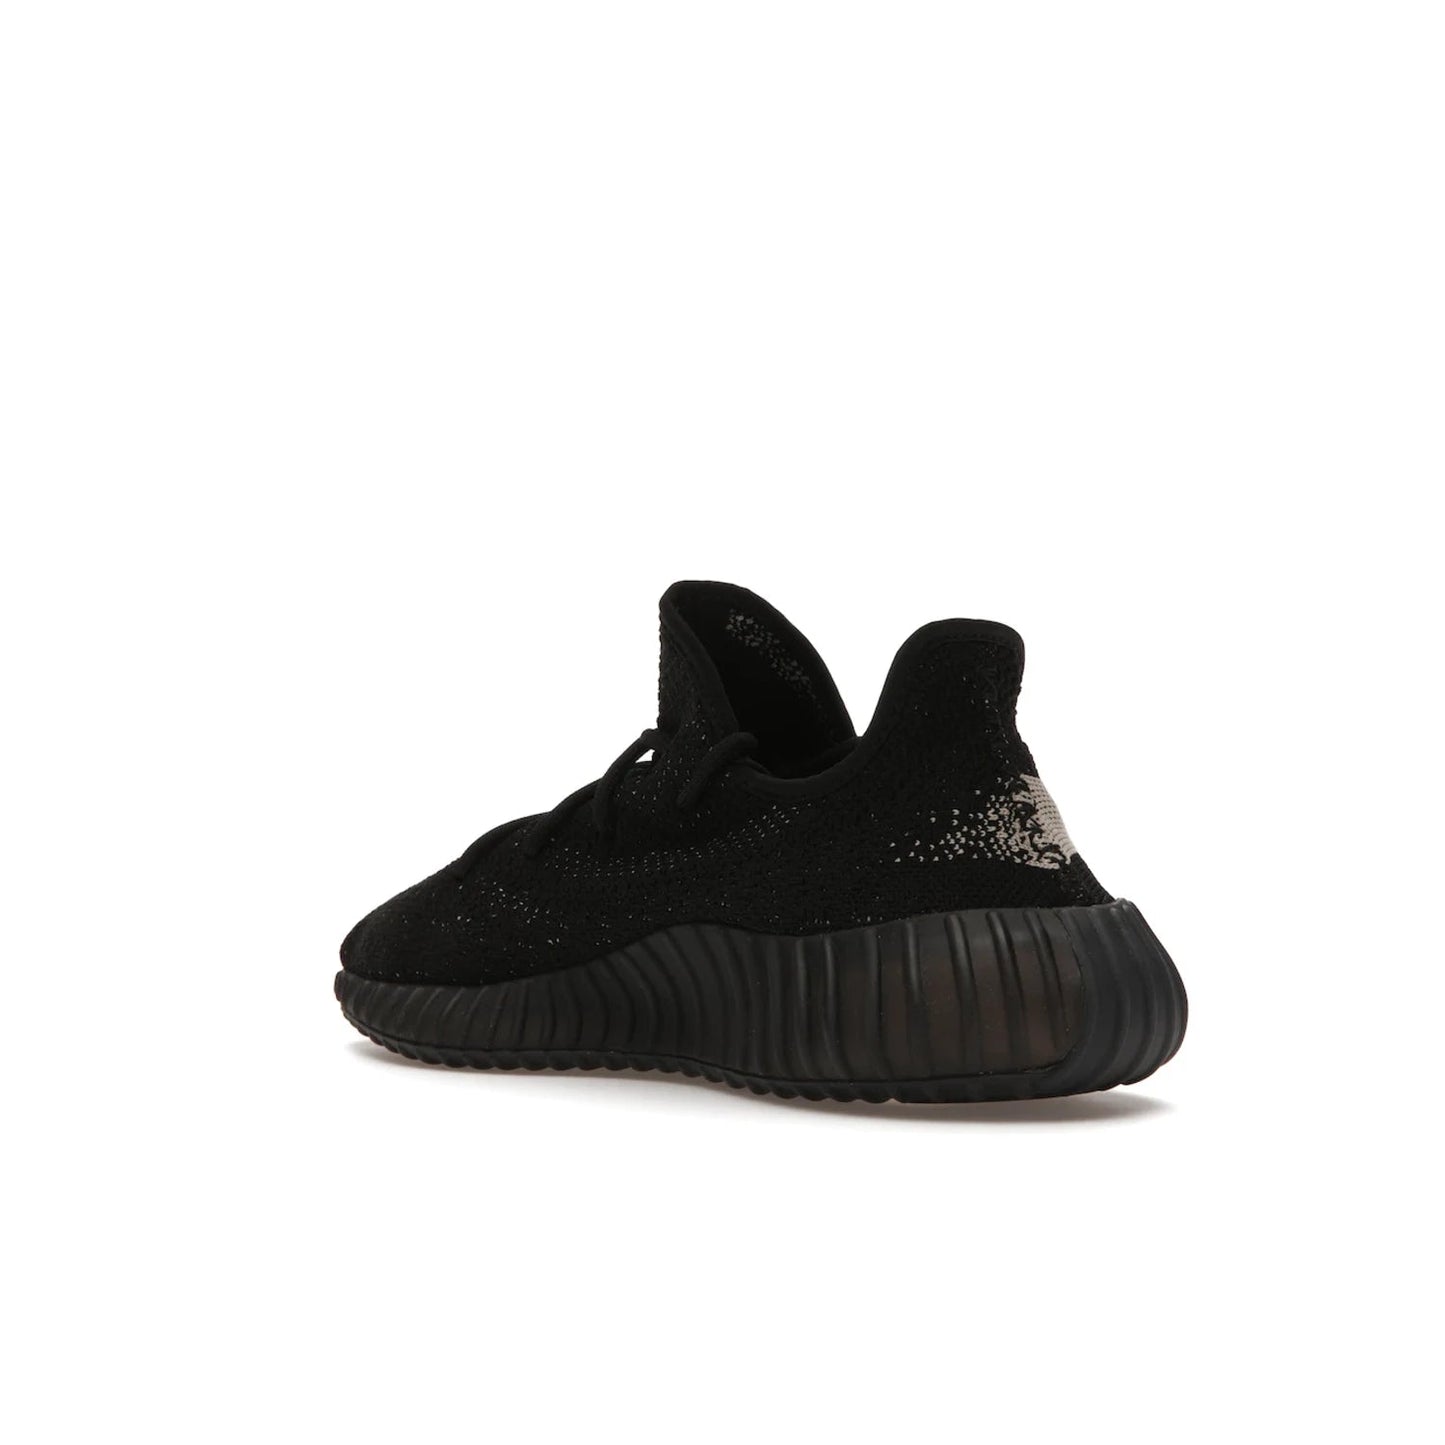 adidas Yeezy Boost 350 V2 Core Black White (2016/2022) - Image 24 - Only at www.BallersClubKickz.com - Stylish adidas Yeezy Boost 350 V2 in classic black with white "SPLY-350" stitched to the side stripe. Features Primeknit upper & Boost sole for comfort. Restock in March 2022.